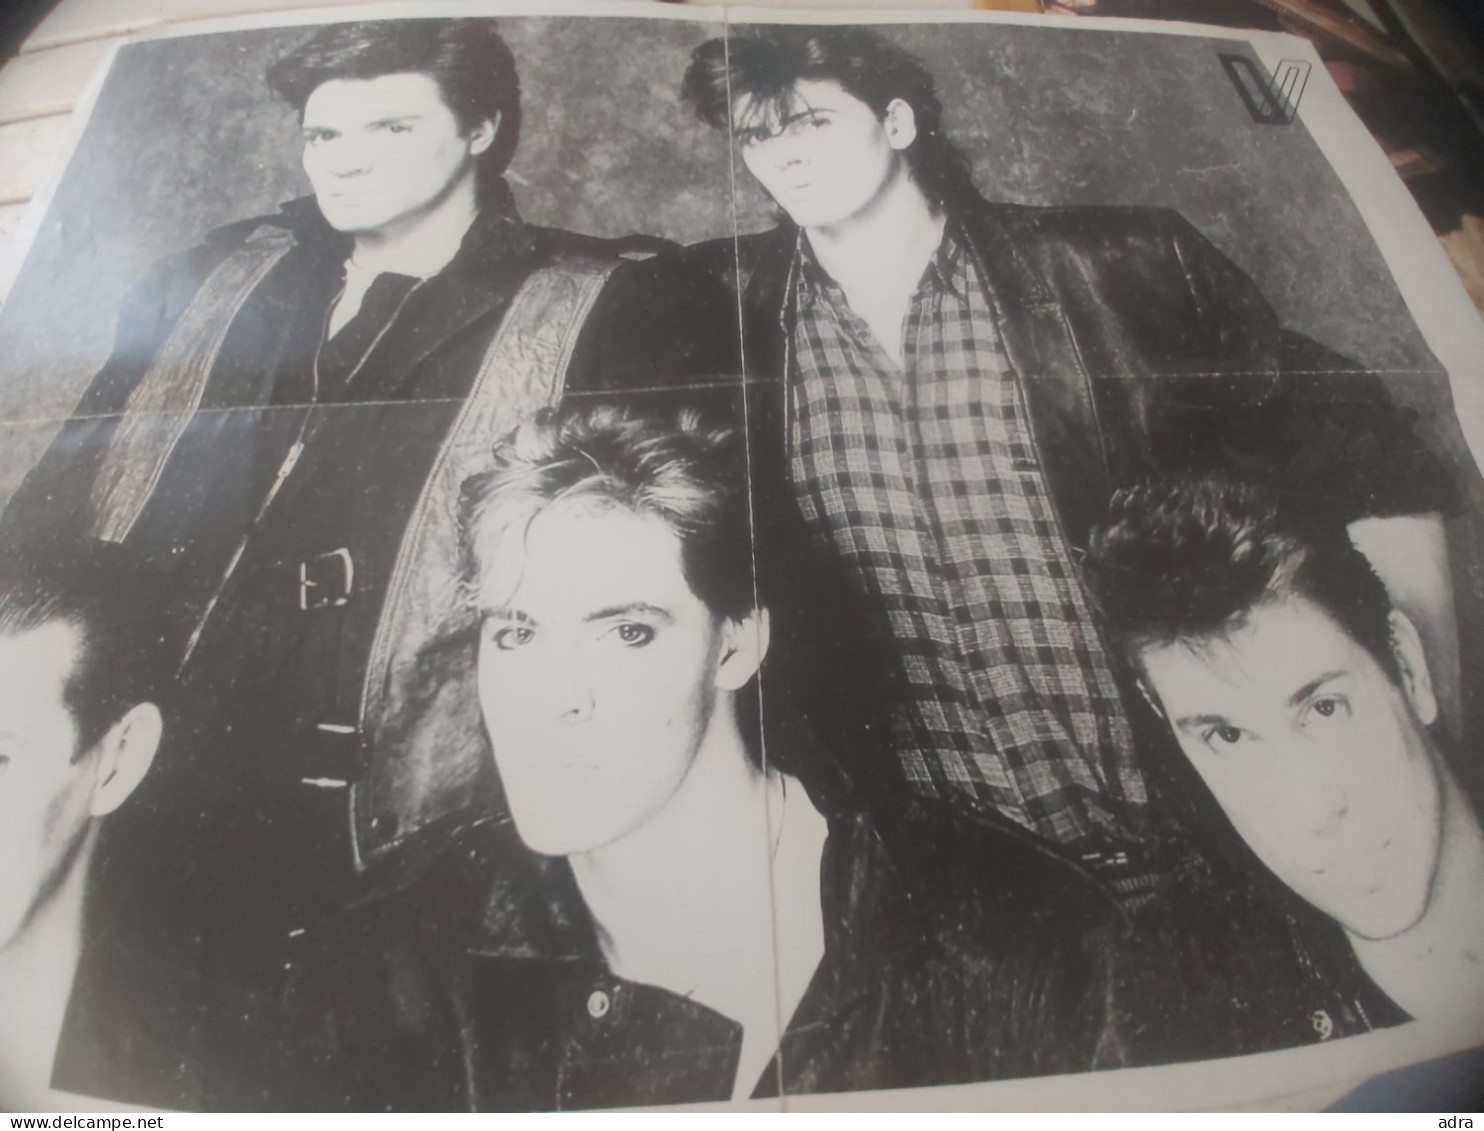 DURAN DURAN TWO SIDES POSTER 42 X 58 Cm VINTAGE RARITY - Posters